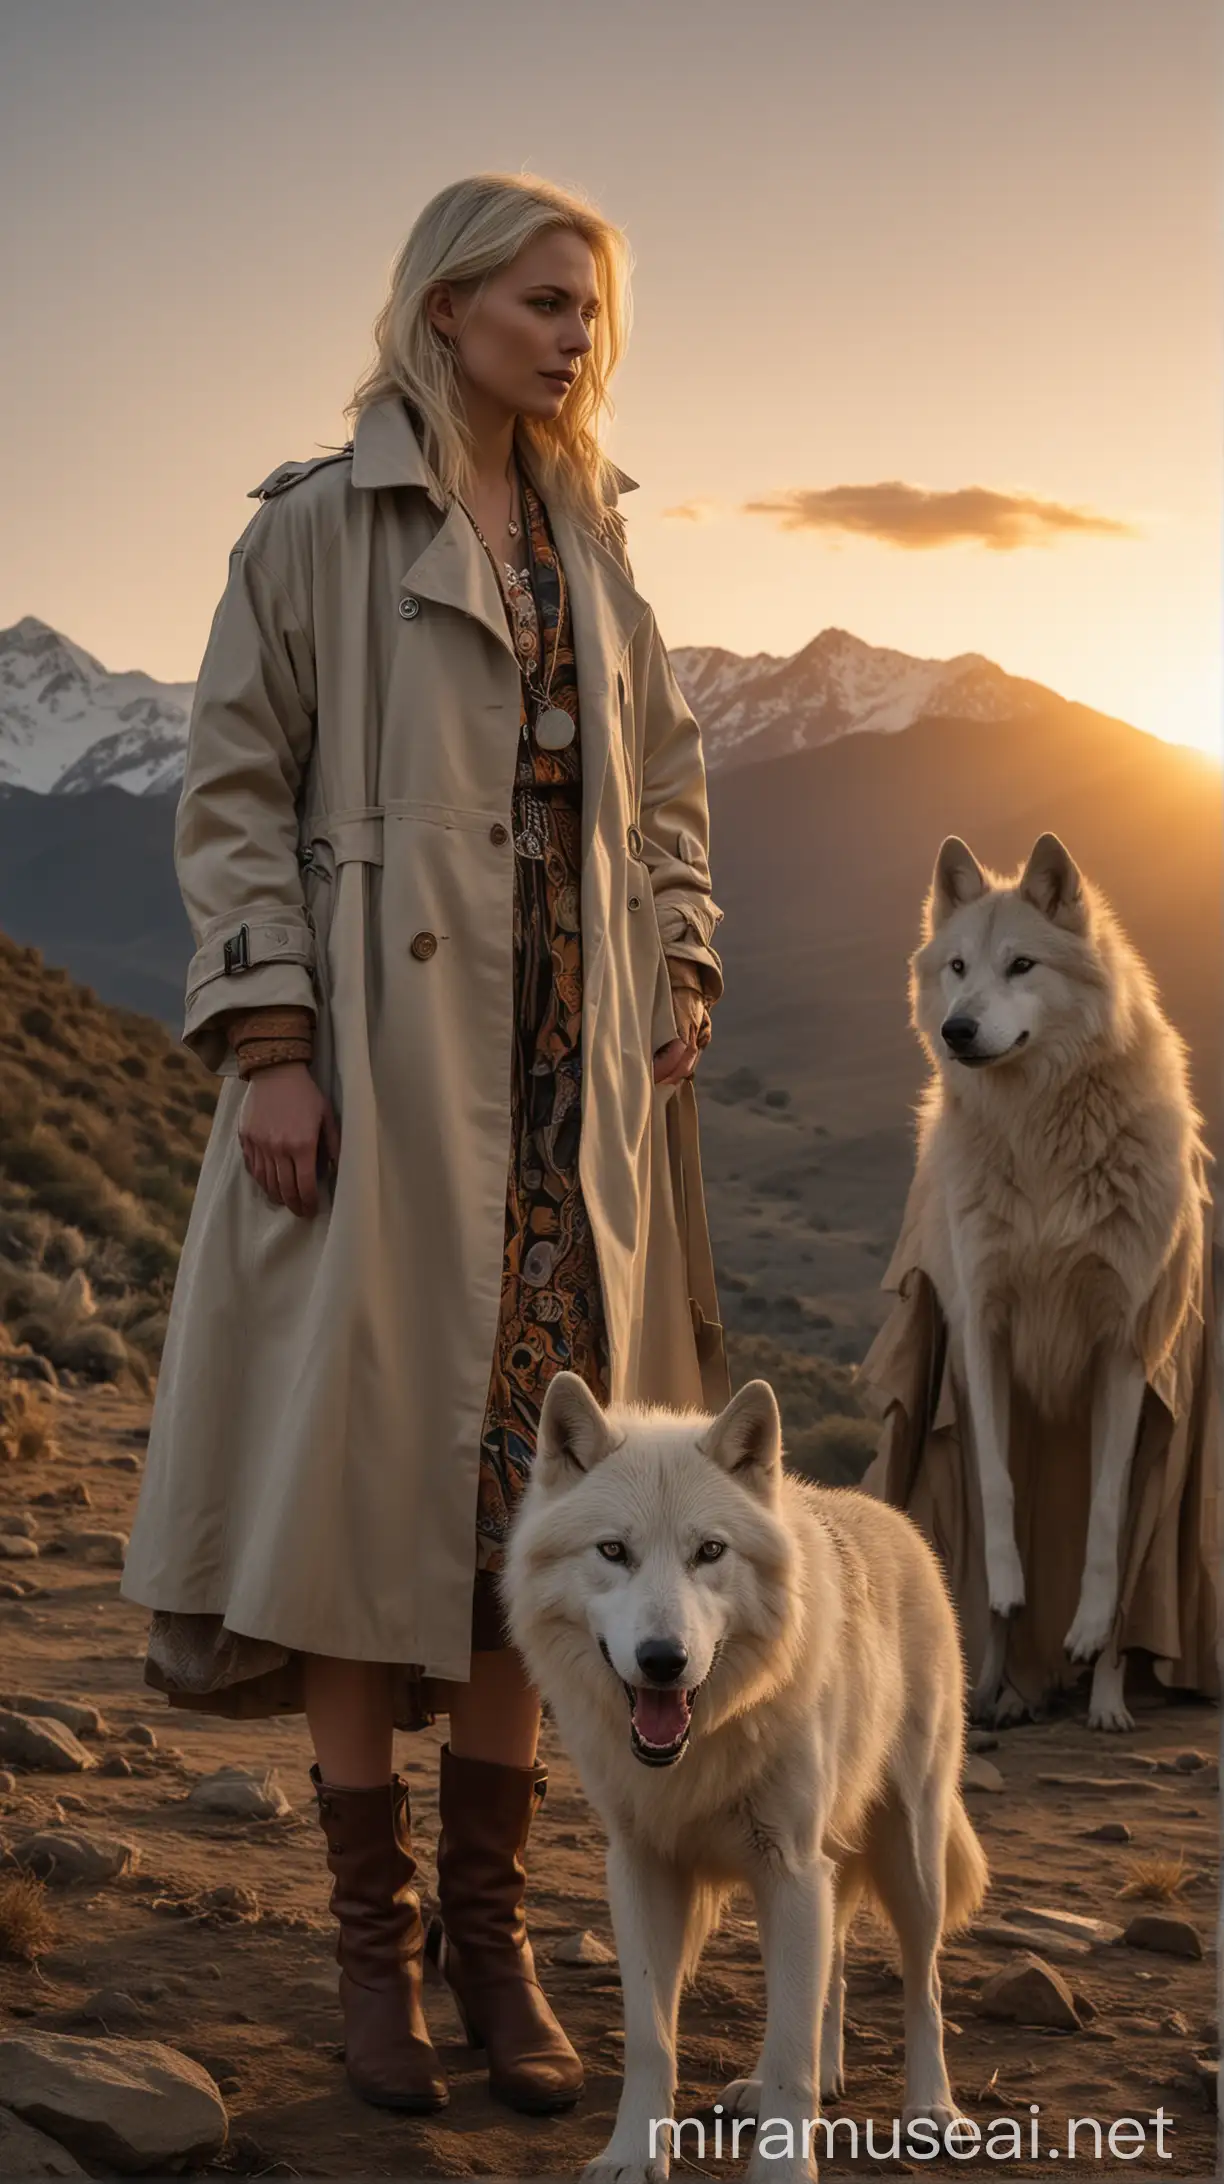 Mysterious Couple with White Wolf at Sunset in Mountain Landscape